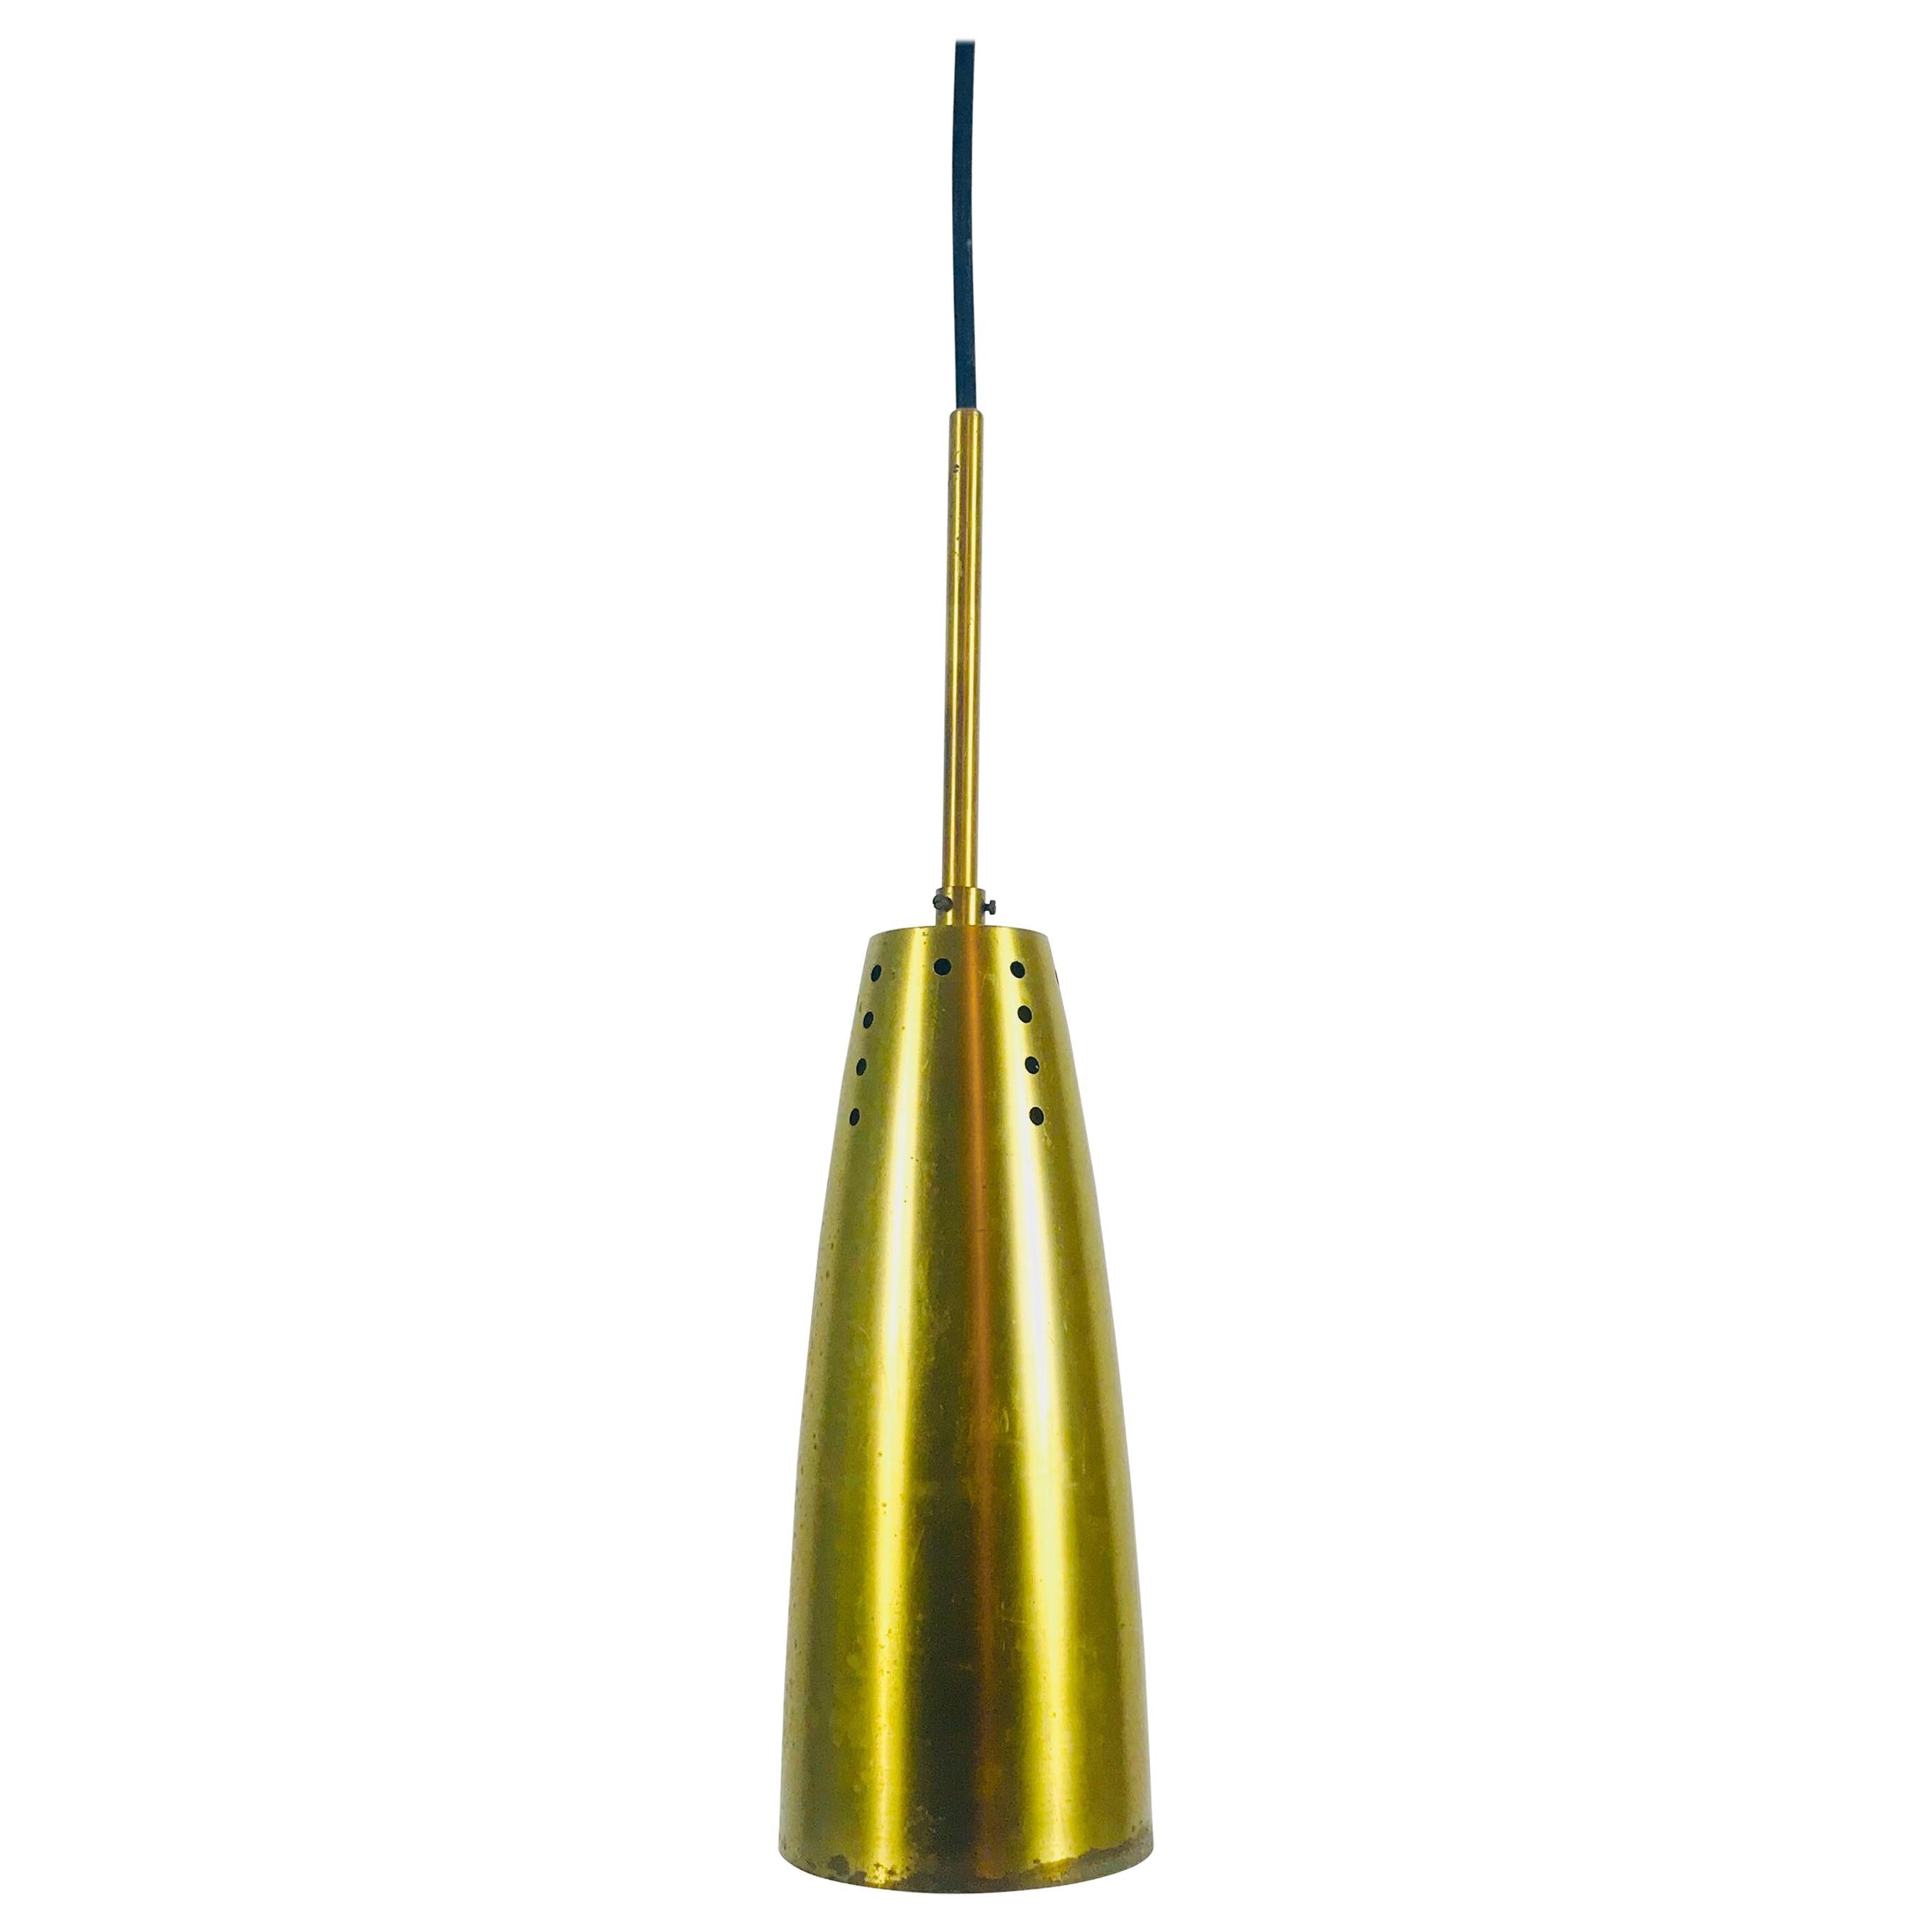 1 of 5 Full Brass Mid-Century Modern Pendant Lamps, 1950s, Germany For Sale